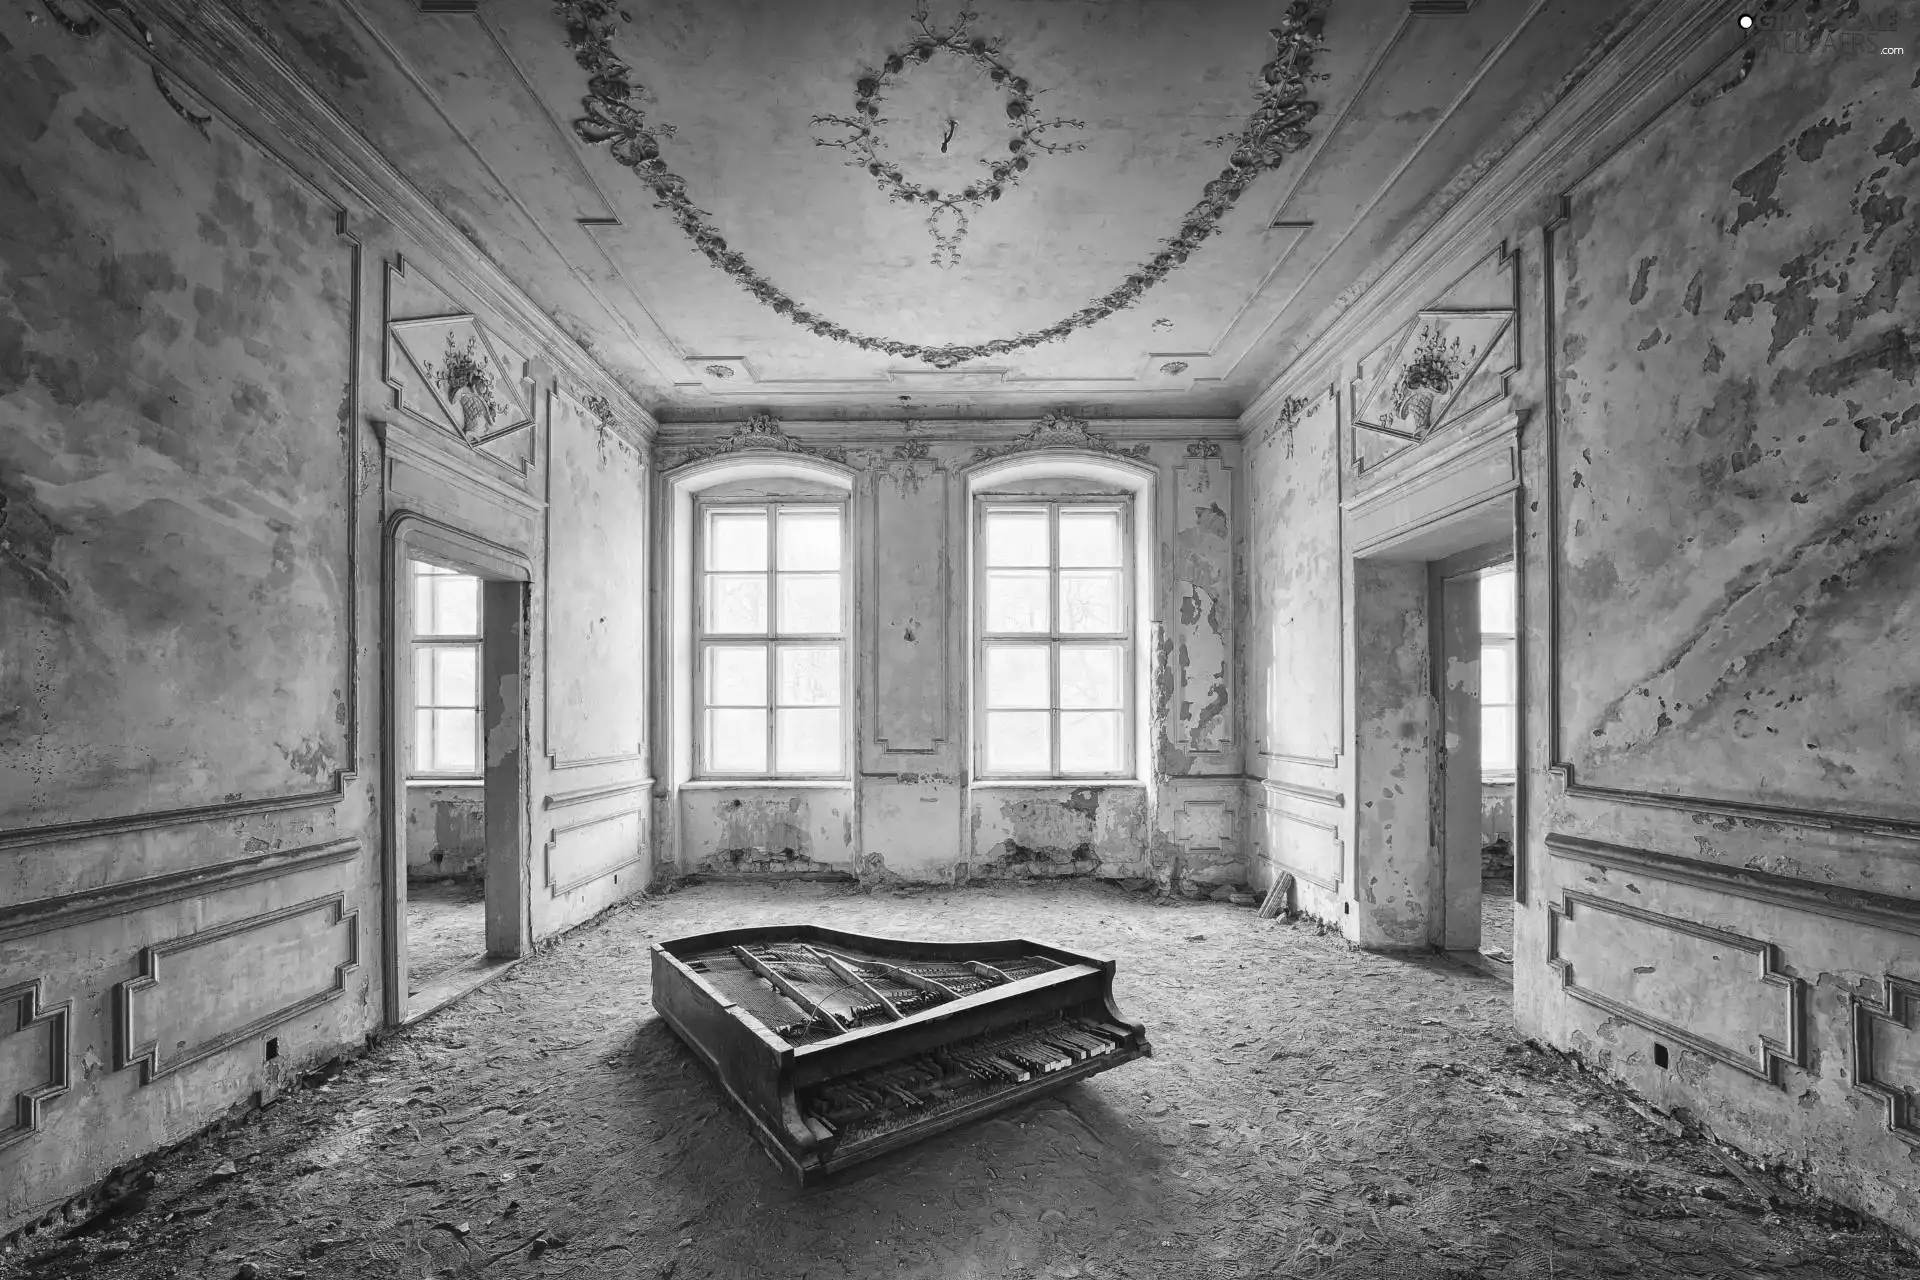 Piano, Windows, Space, damaged, Neglected